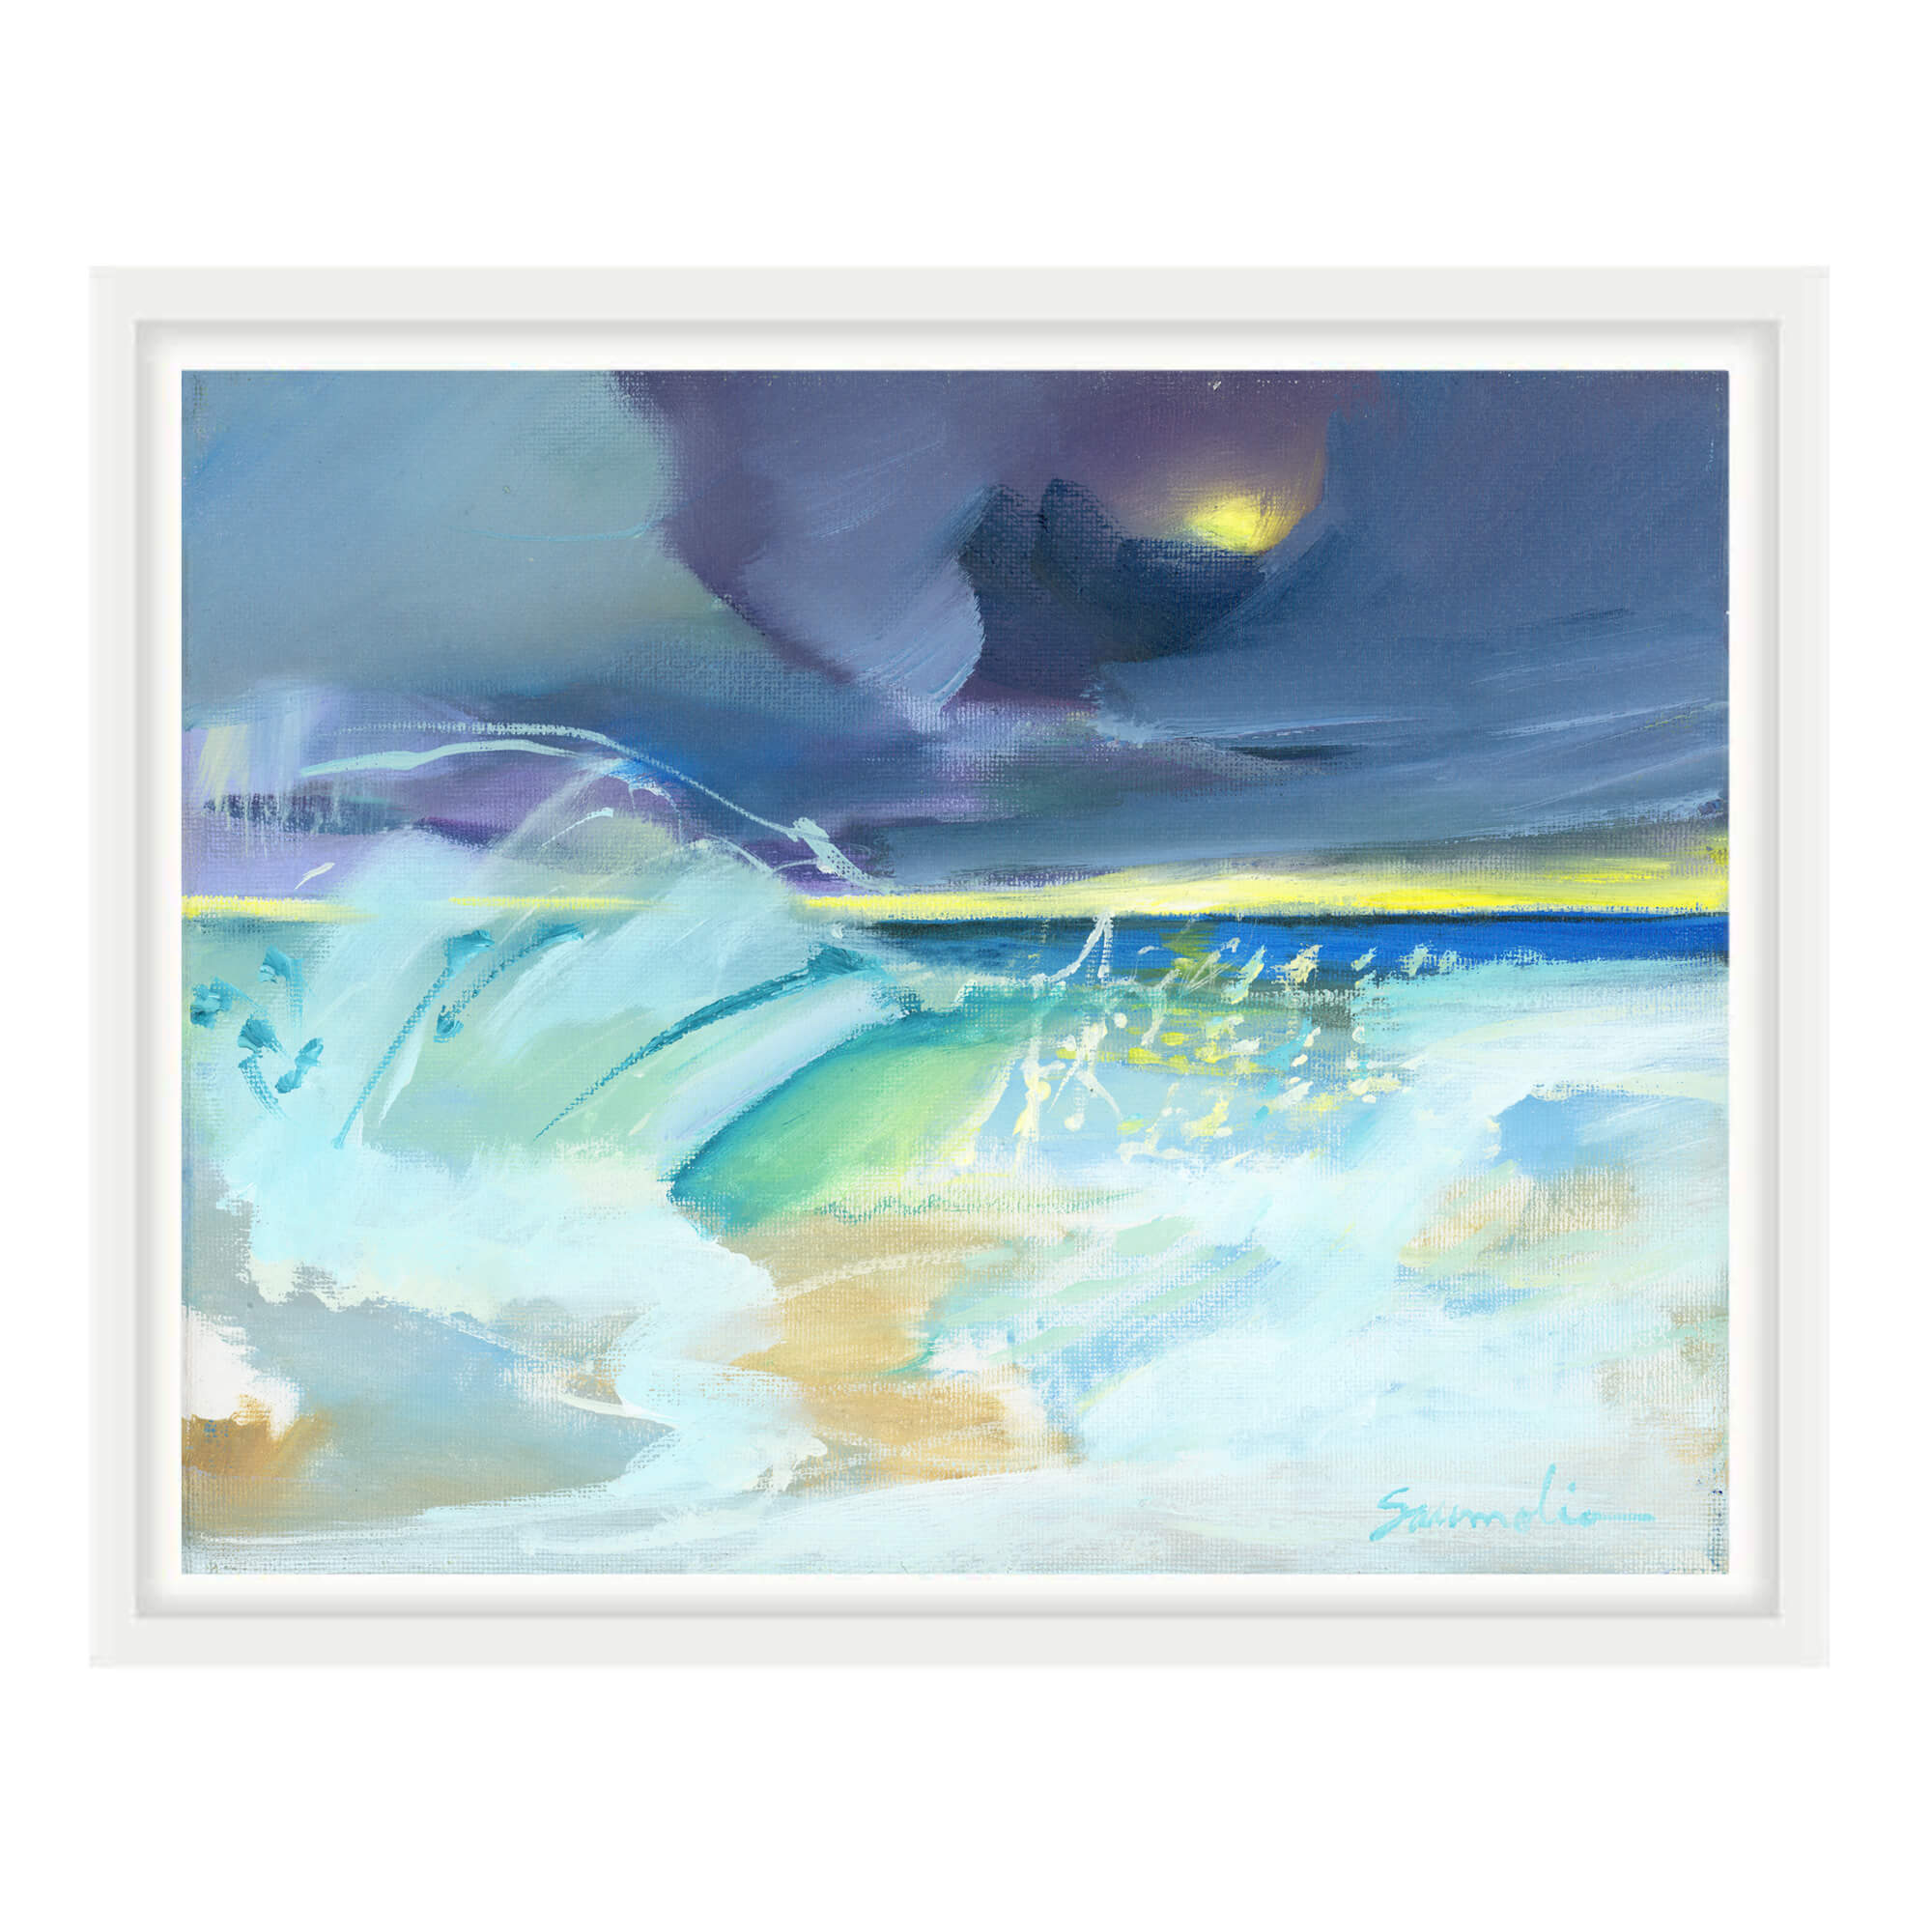 Seascape with dark clouds and large crashing waves by Hawaii artist Saumolia Puapuaga